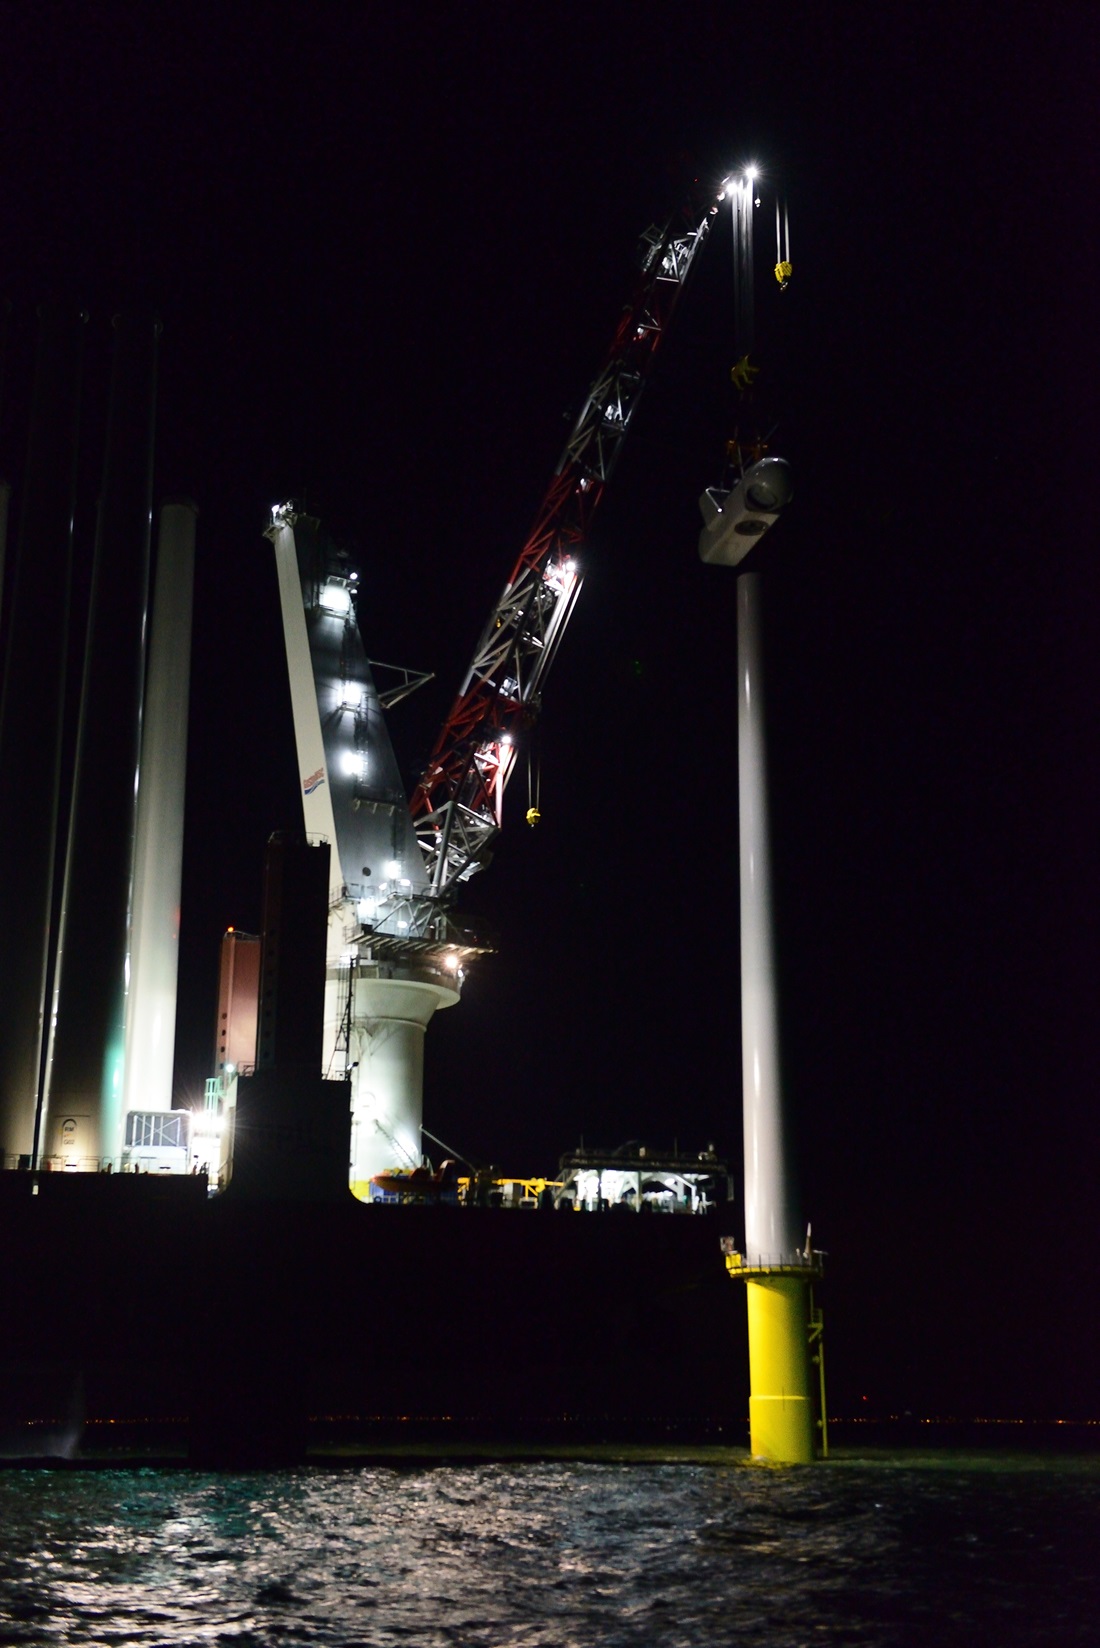 offshore turbine being built at night